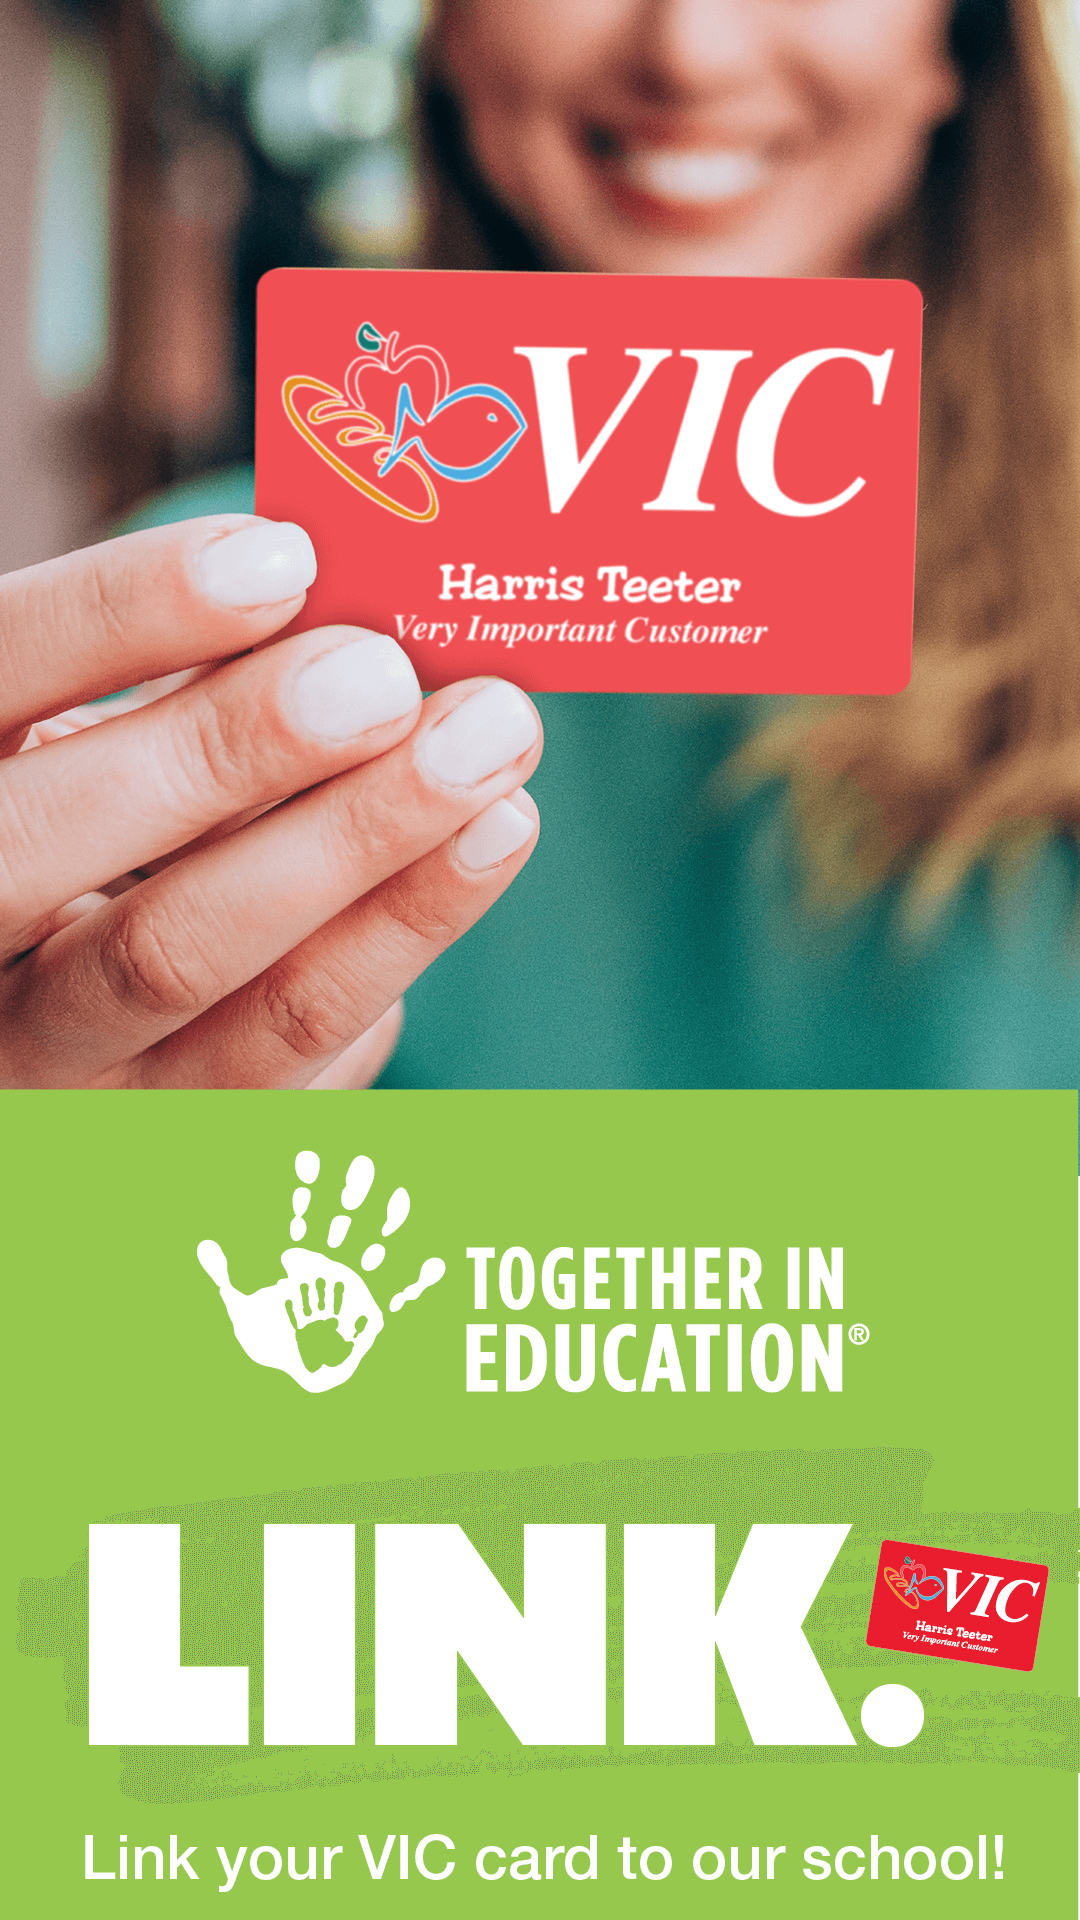 Together in Education. Link Your VIC card